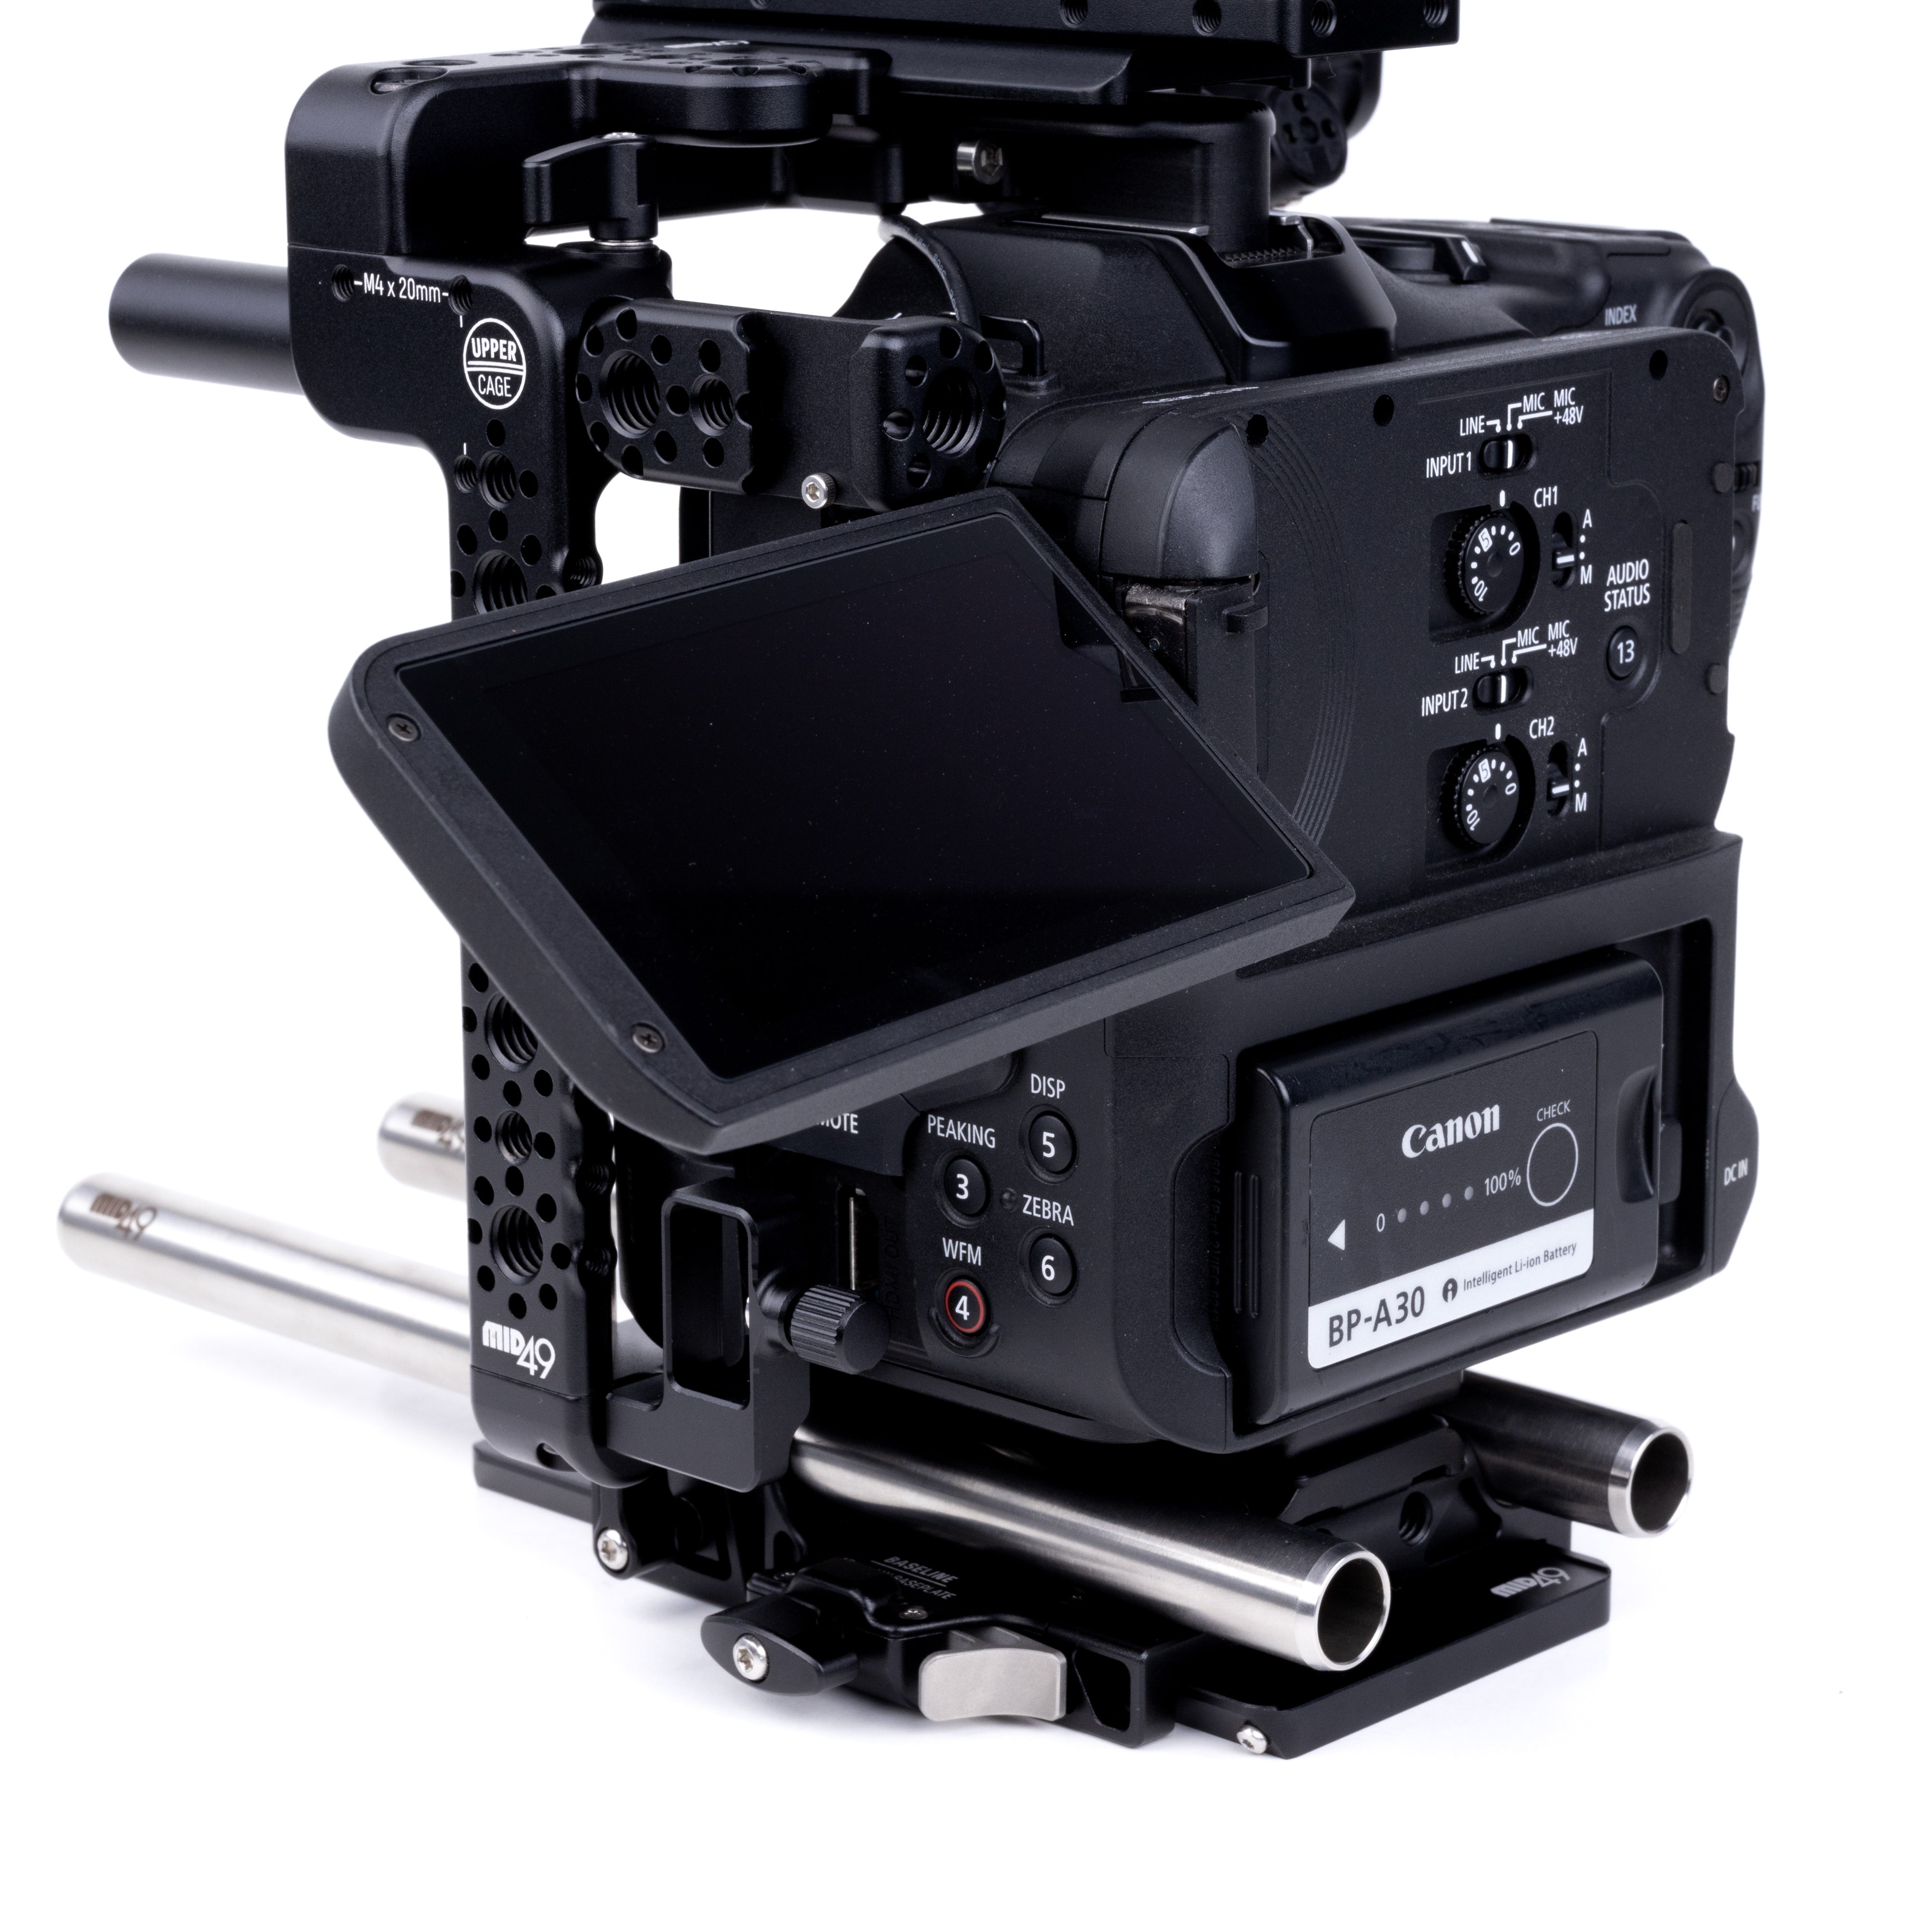 Mid Kit for Canon C70